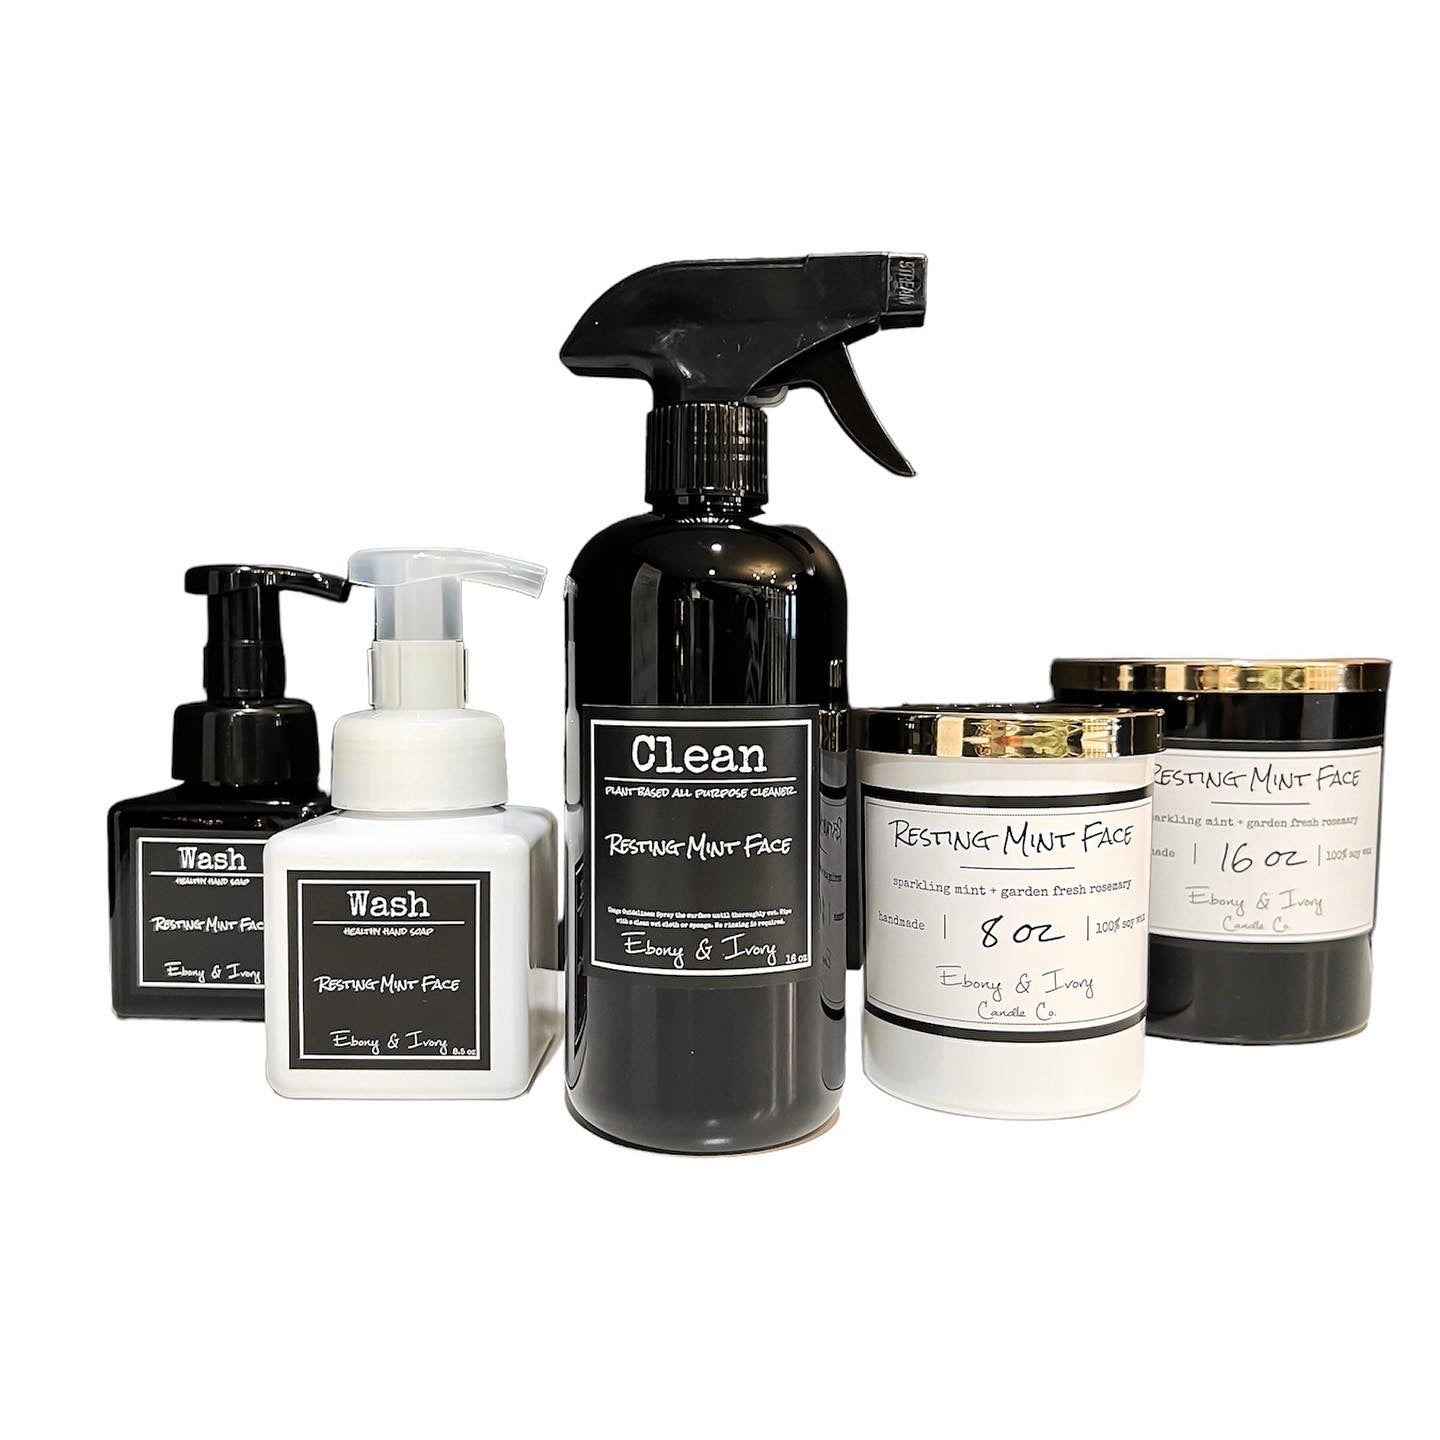 Resting Mint Face home collection has a black foaming hand soap, a white foaming hand soap, a black spray bottle of all purpose cleaner, a white eight ounce soy wax candle, and a black sixteen ounce soy wax candle. All scented with mint and Rosemary